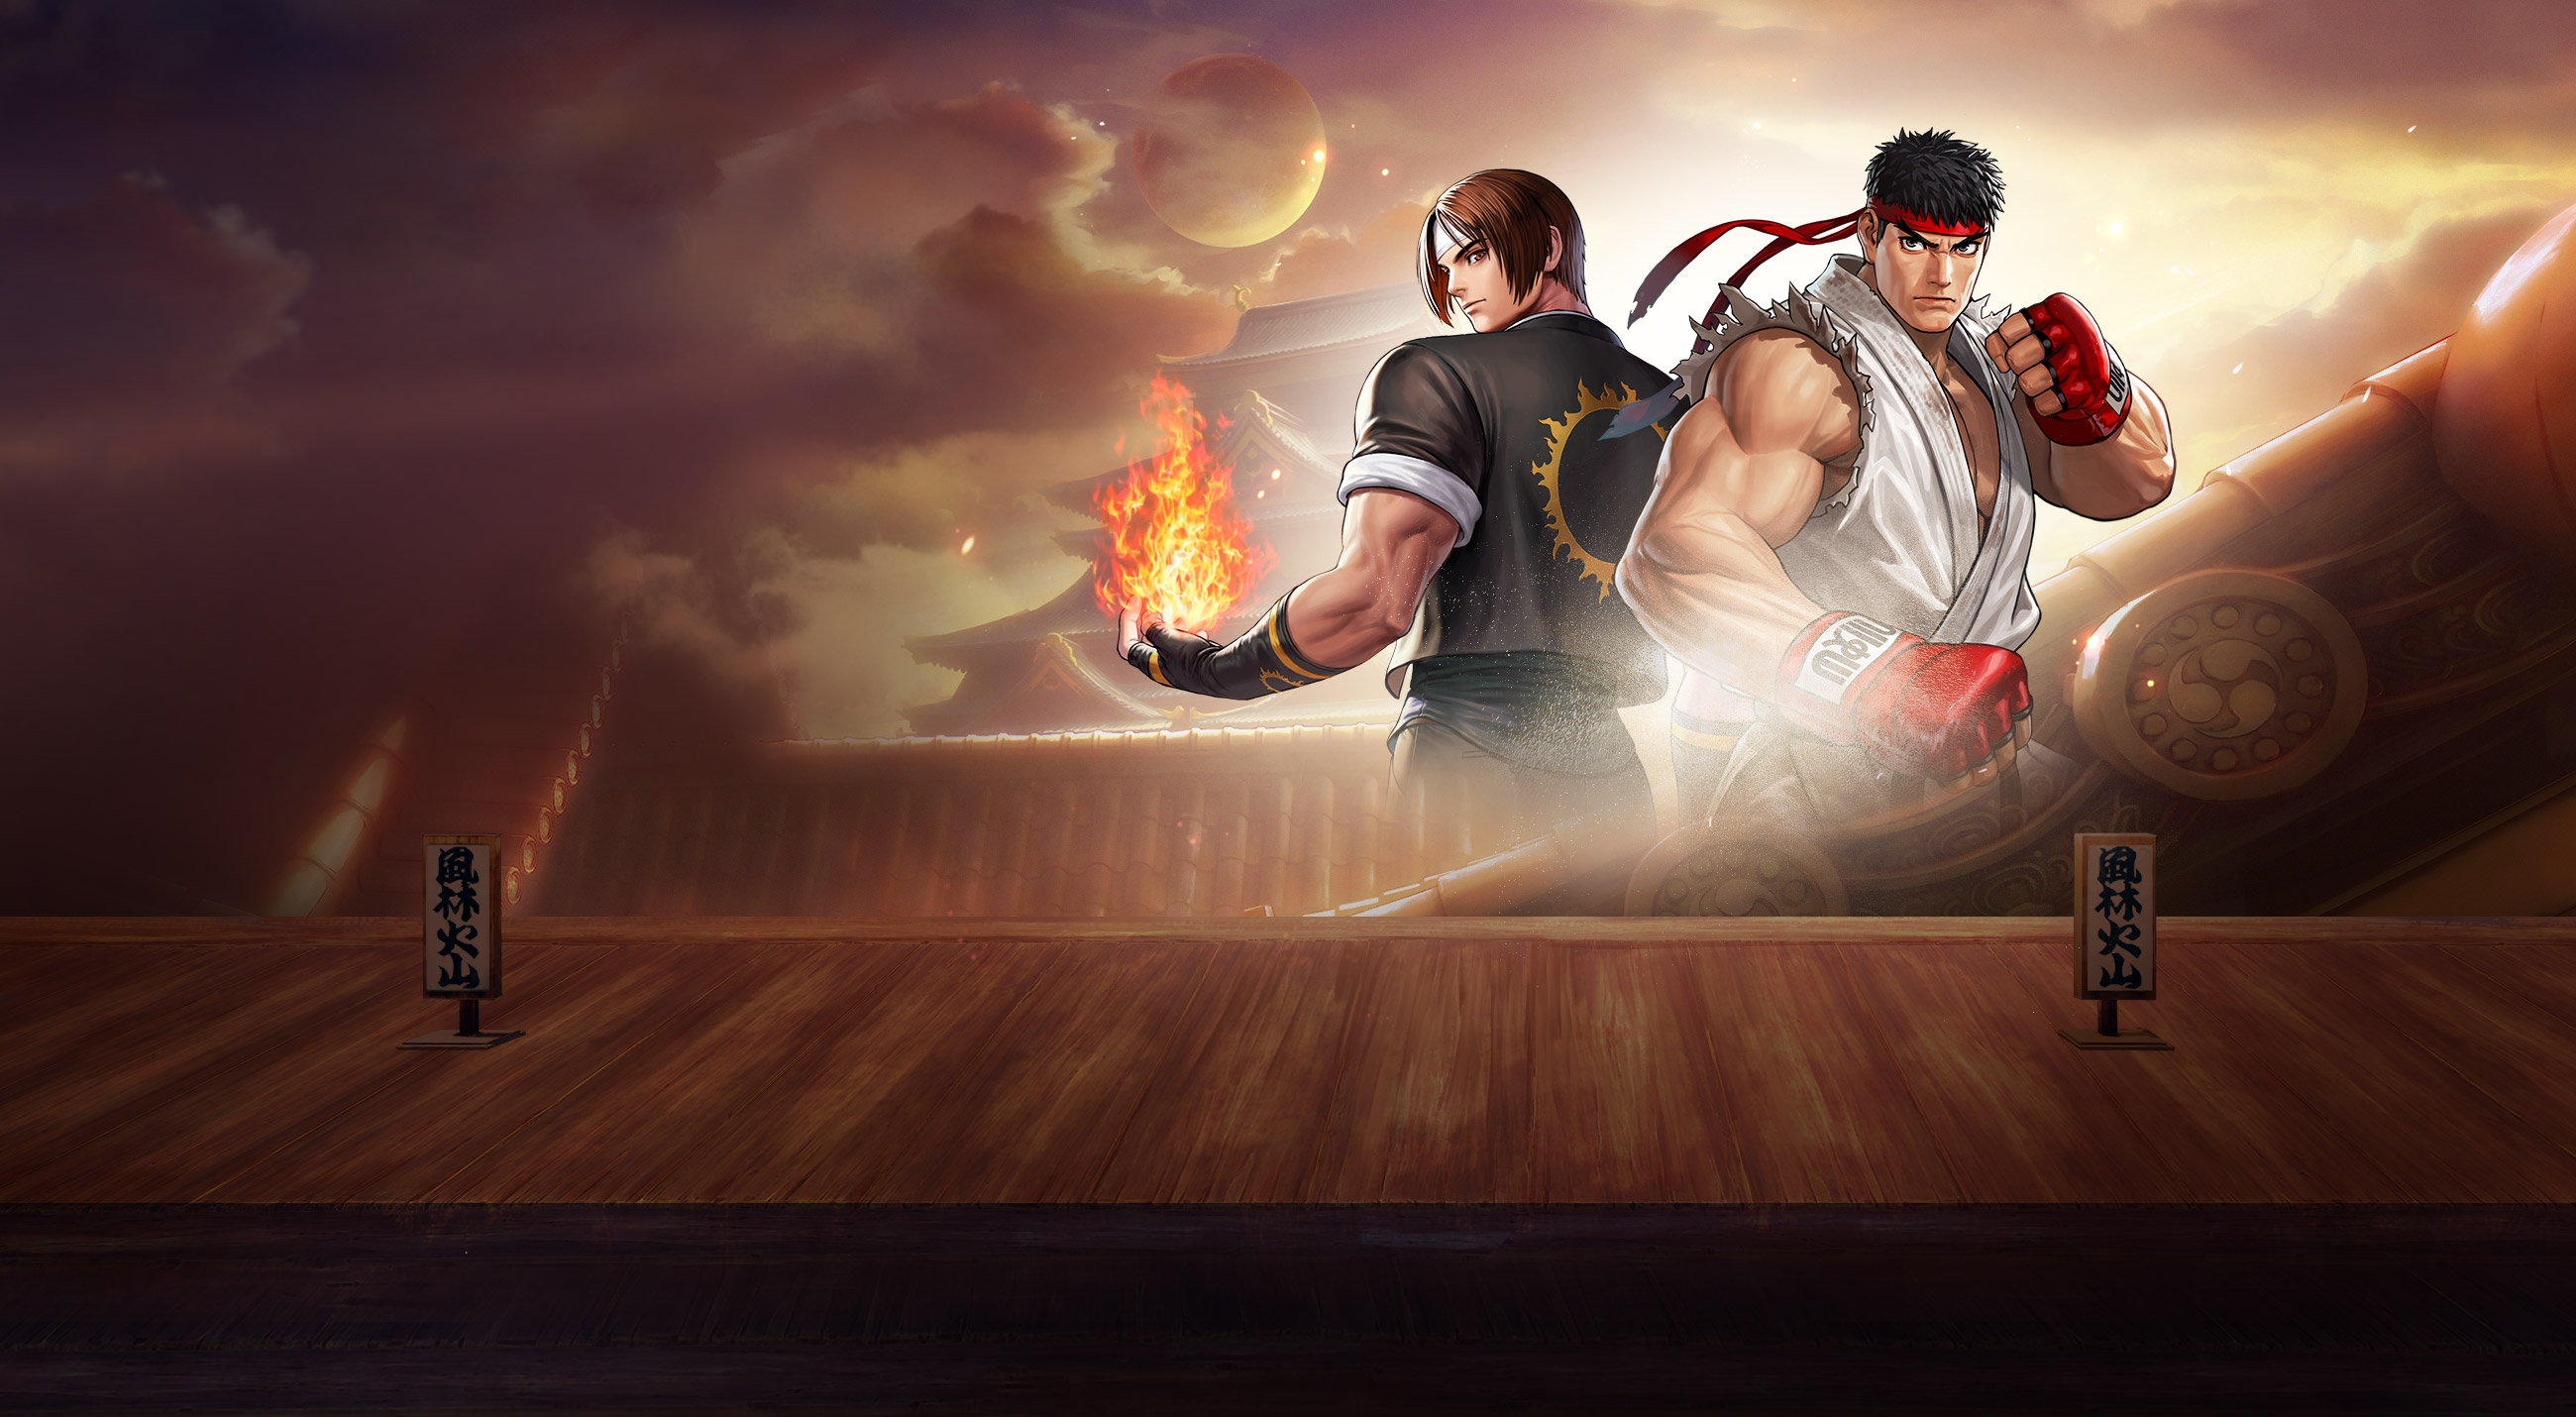 king of fighters, kyo kusanagi, video game, crossover, ryu (street fighter), street fighter 32K